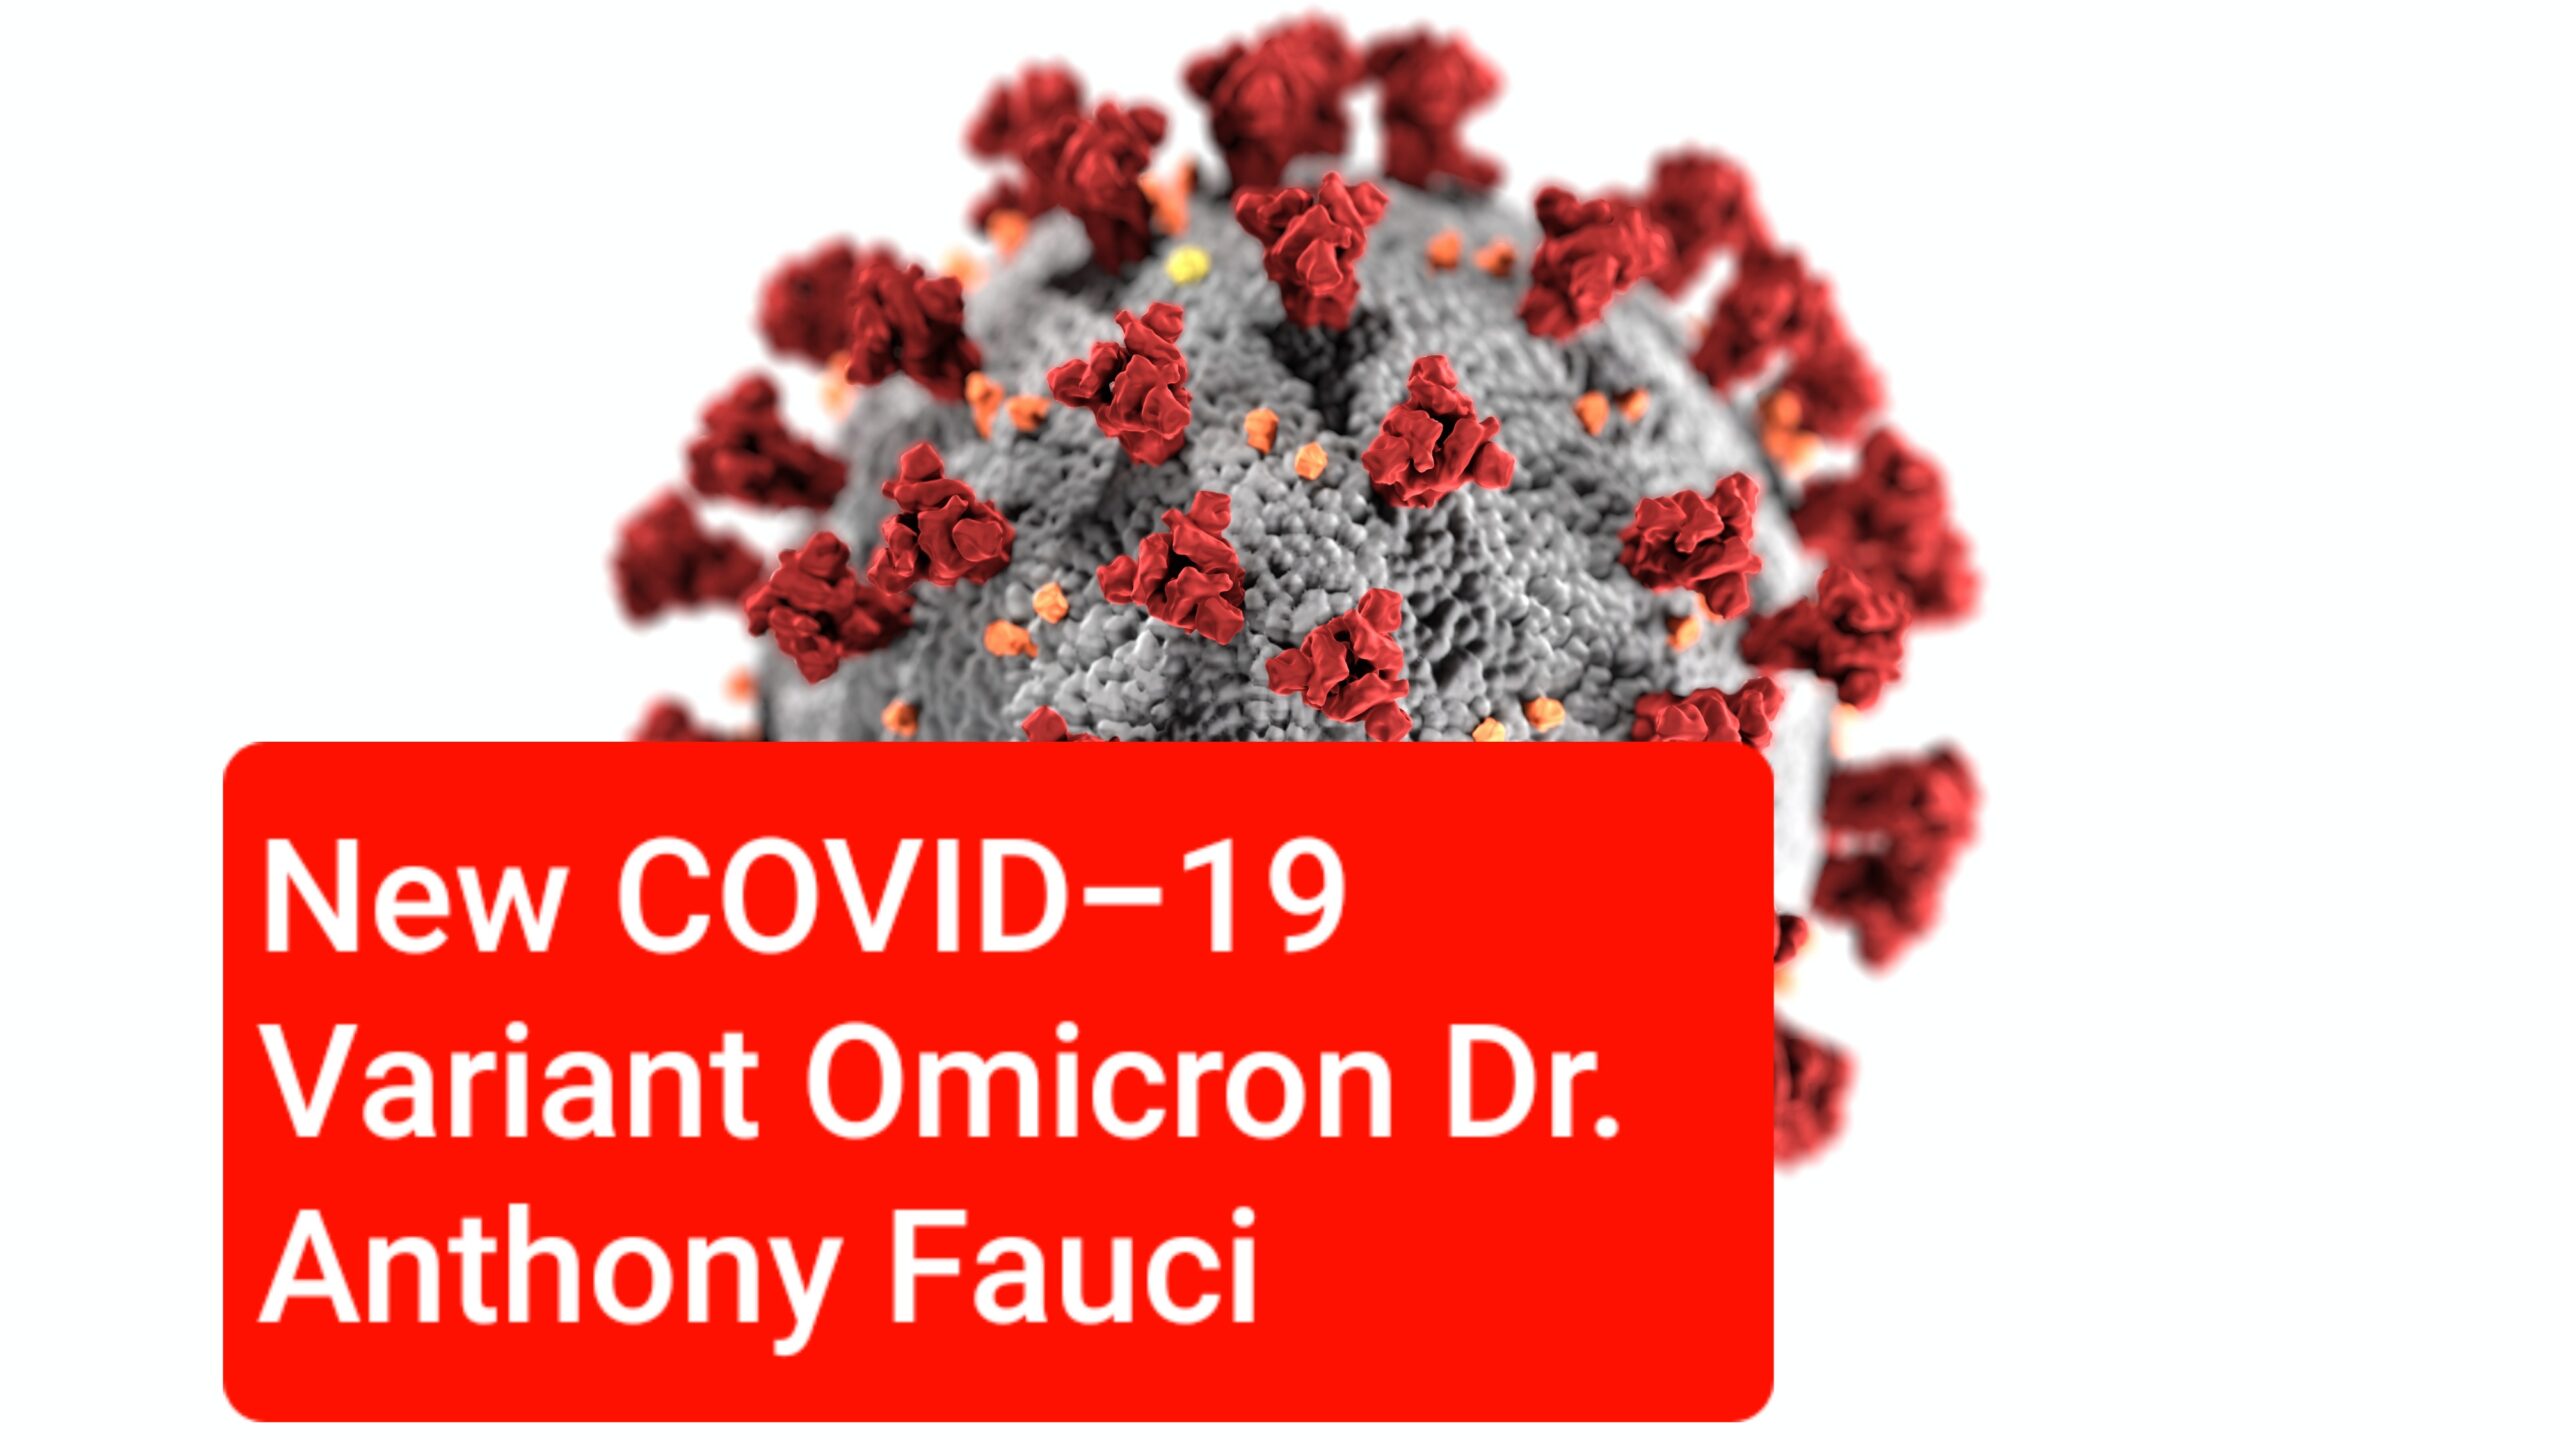 New COVID-19 Variant Omicron Dr. Anthony Fauci